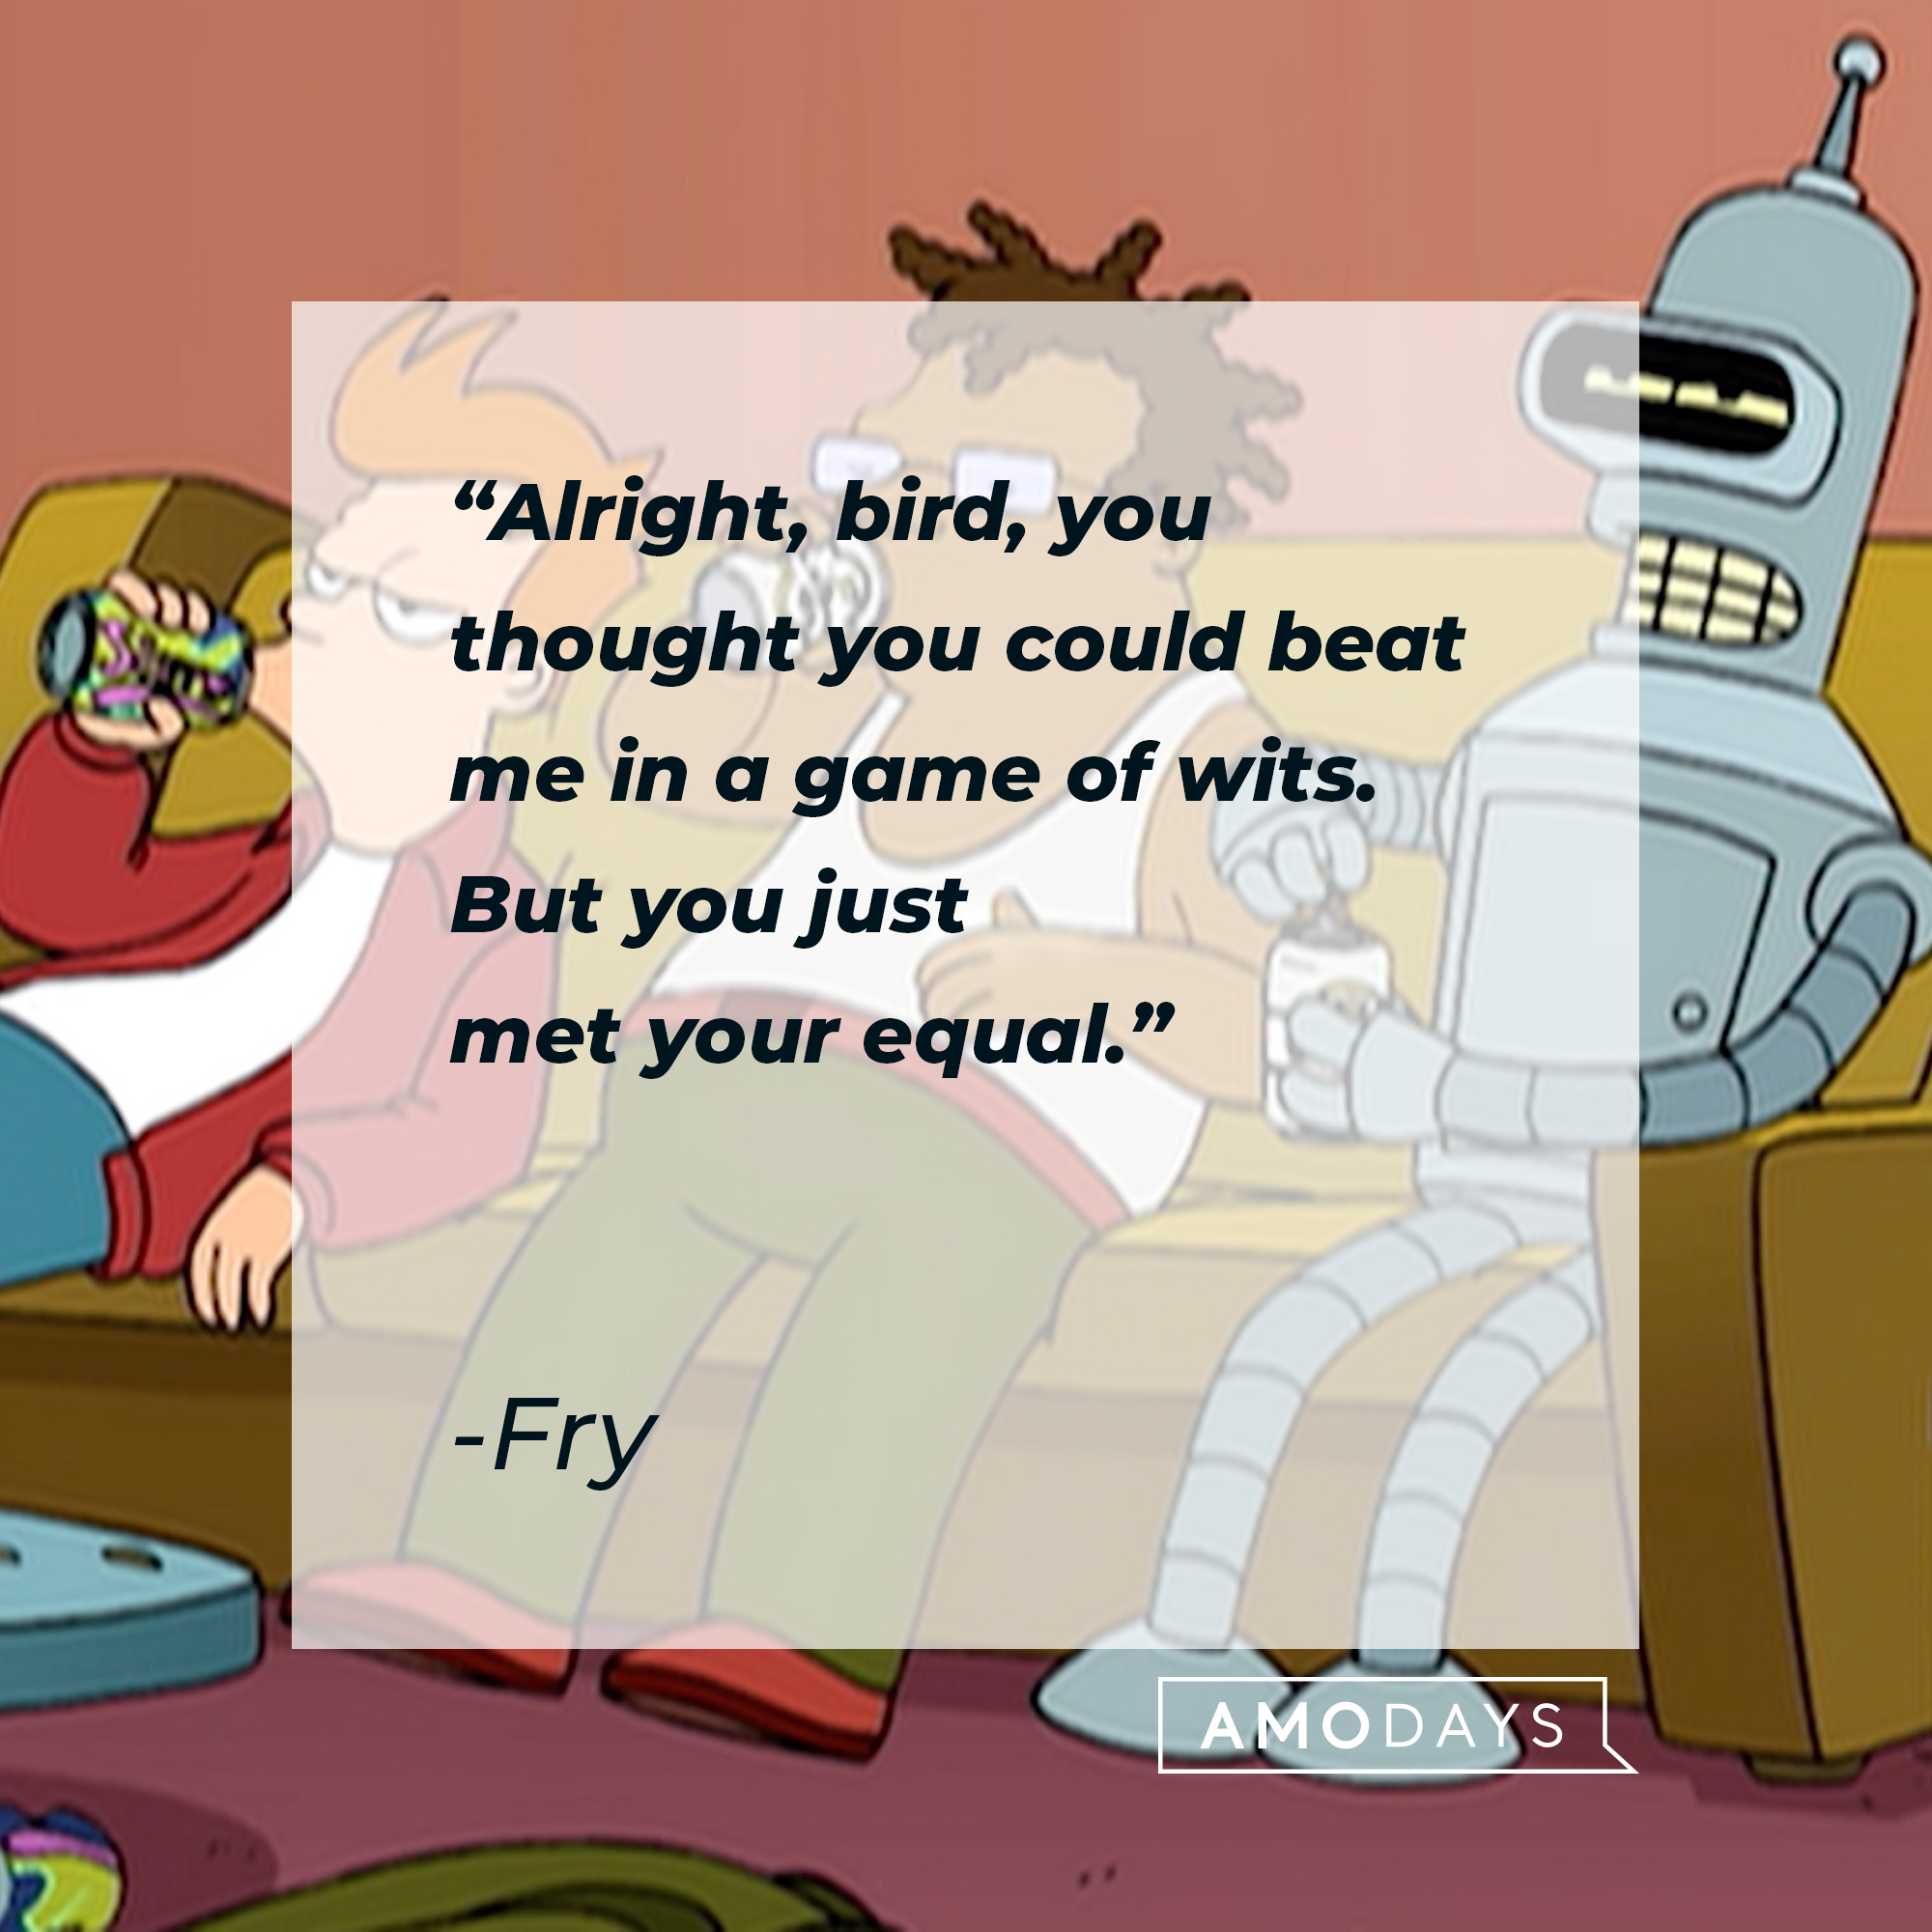 Fry Futurama's quote: "Alright, bird, you thought you could beat me in a game of wits. But you just met your equal." | Source: Facebook.com/Futurama